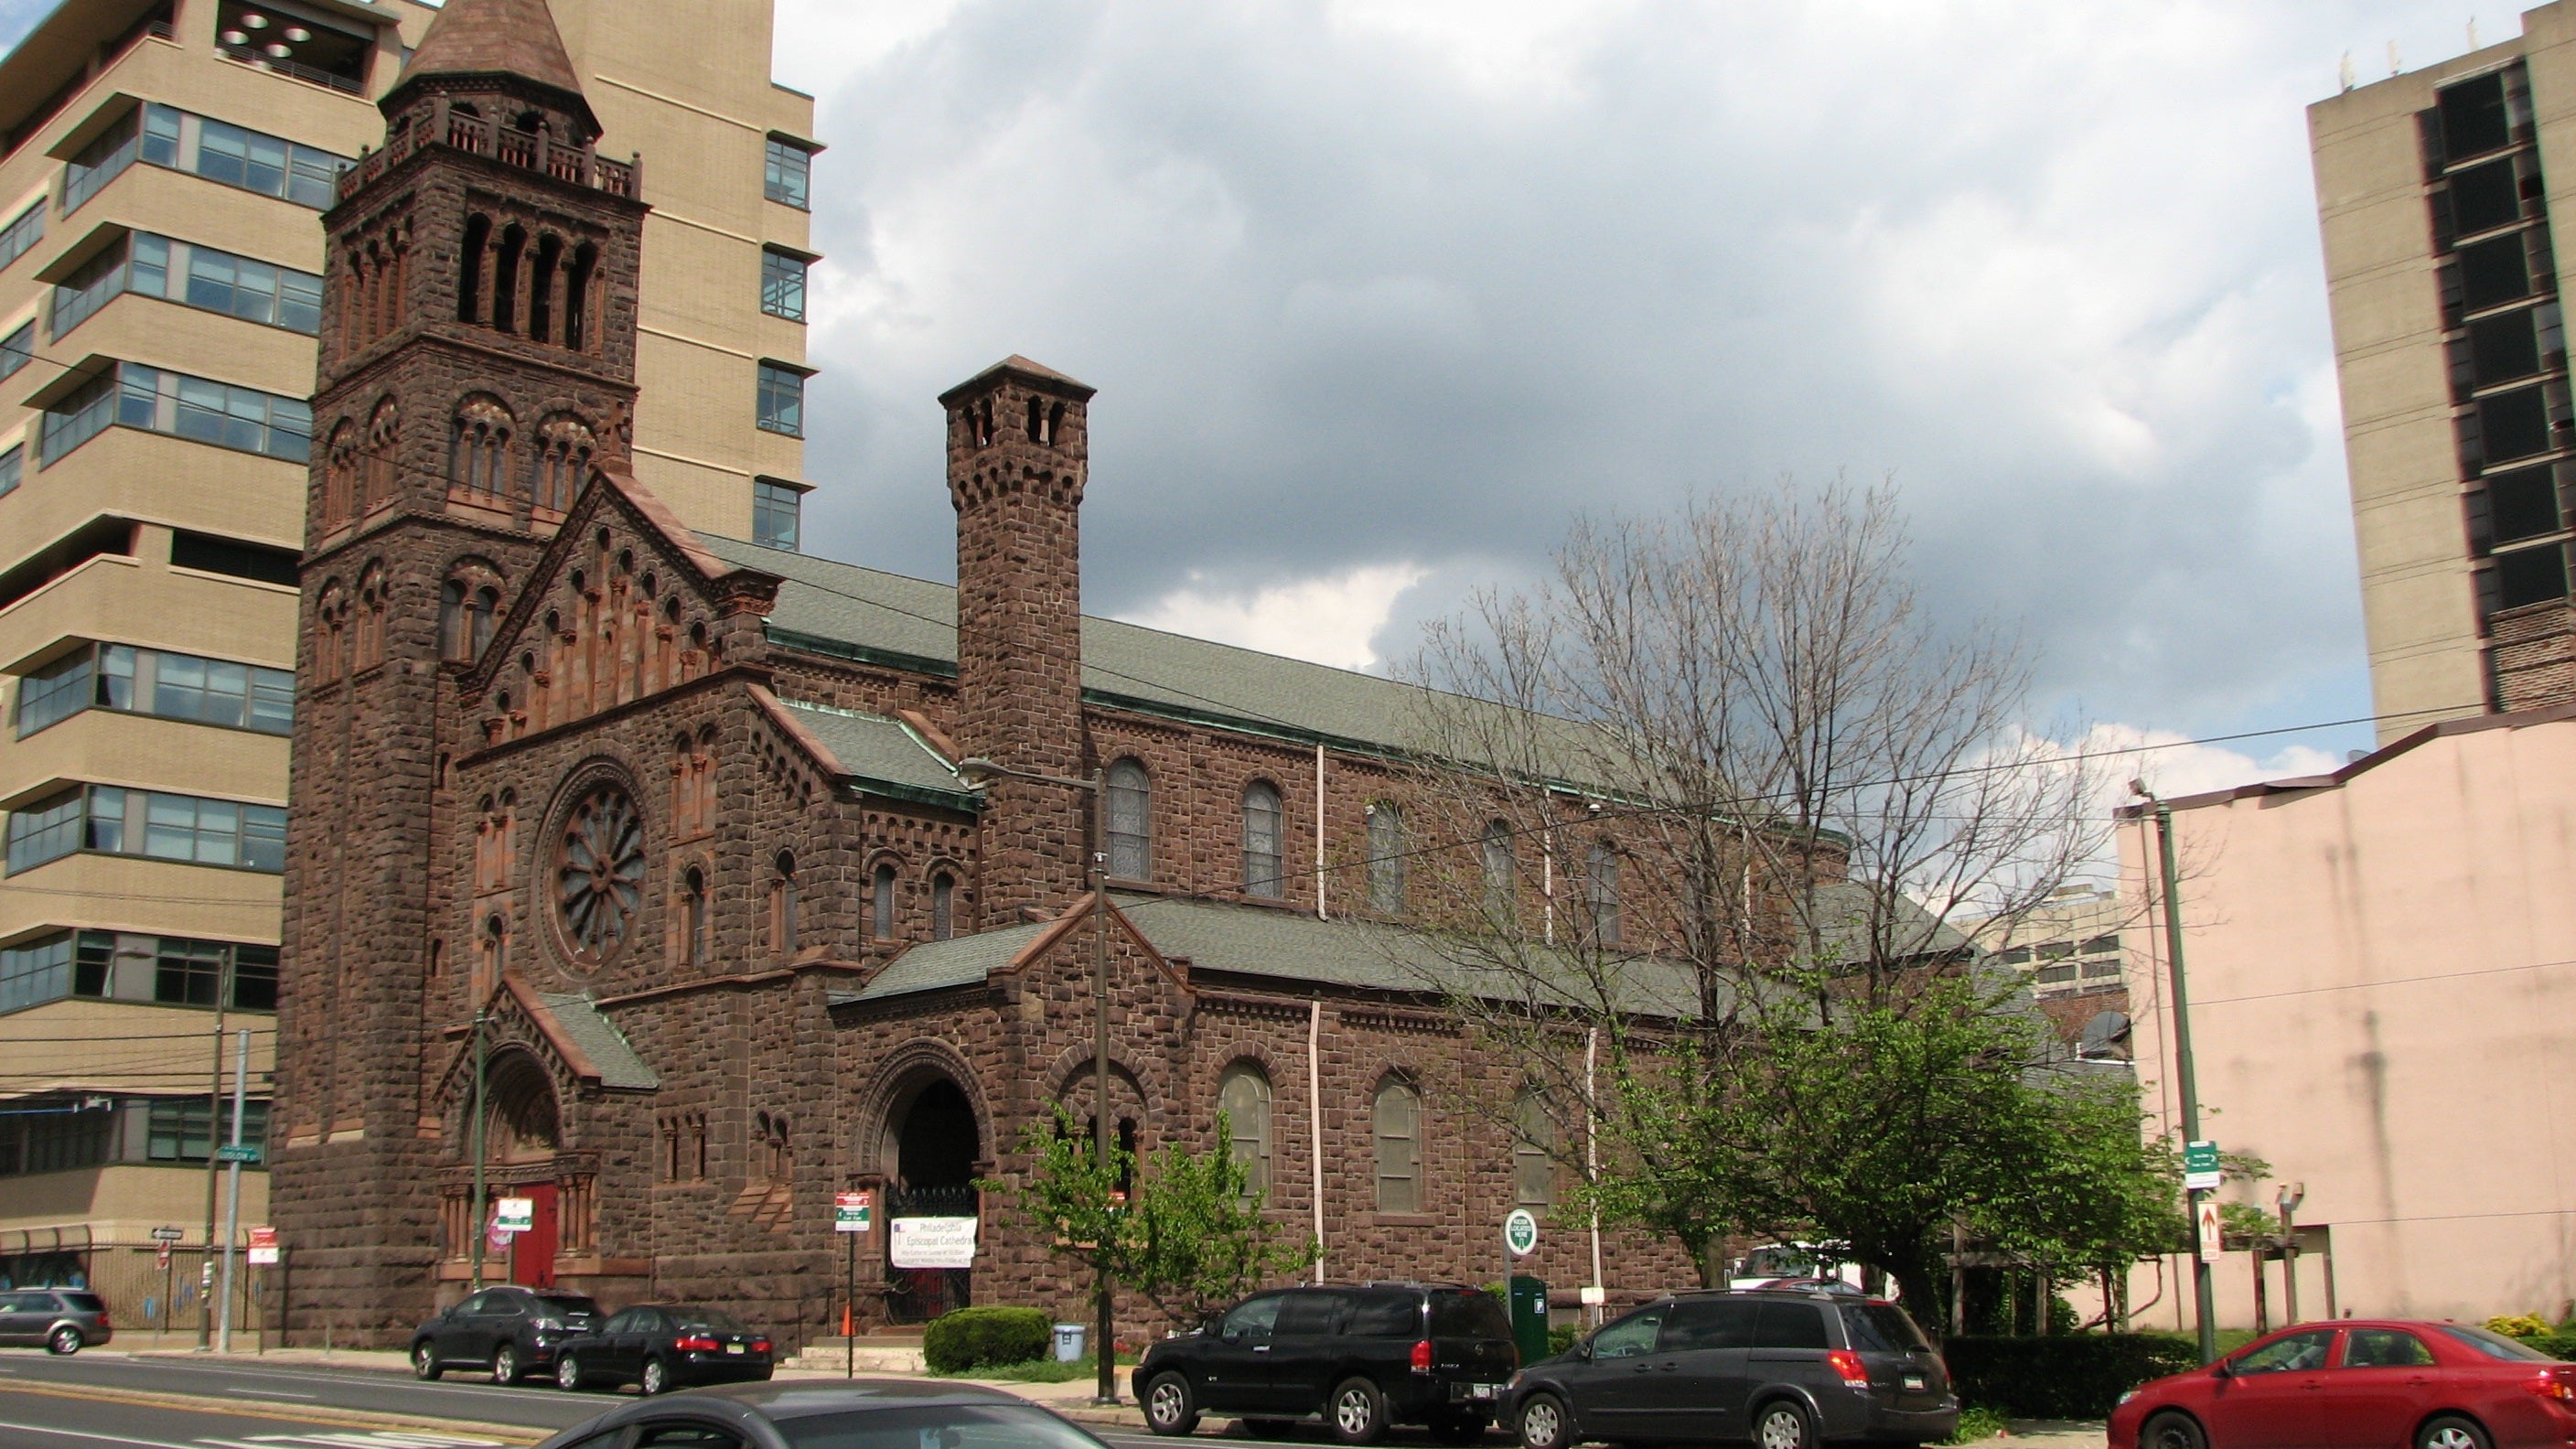 The Episcopal Cathedral, on 38th Street at Ludlow, was built in 1898 by Charles Burns.